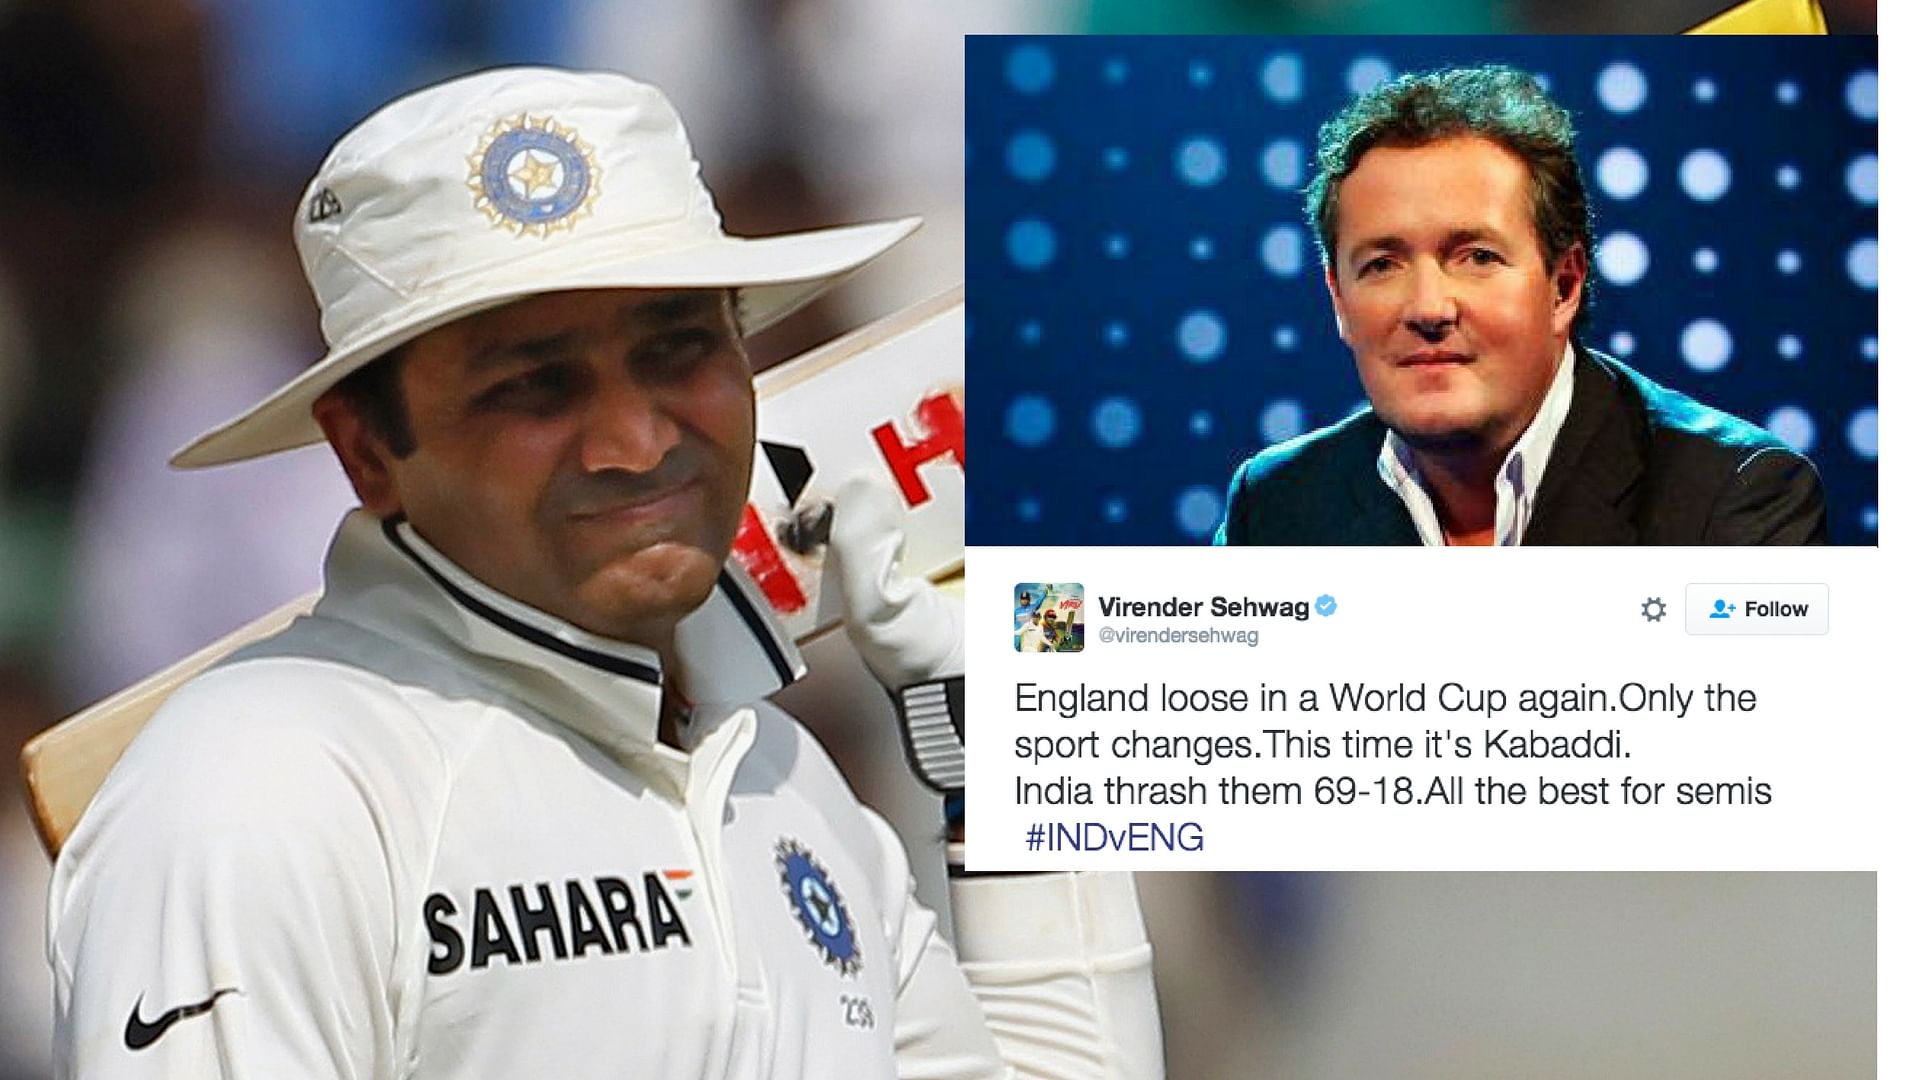 Sehwag congratulated the Indian team for “thrashing” England in the Kabaddi World Cup. (Photo Courtesy: Reuters/<a href="https://twitter.com/piersmorgan">Twitter</a>)